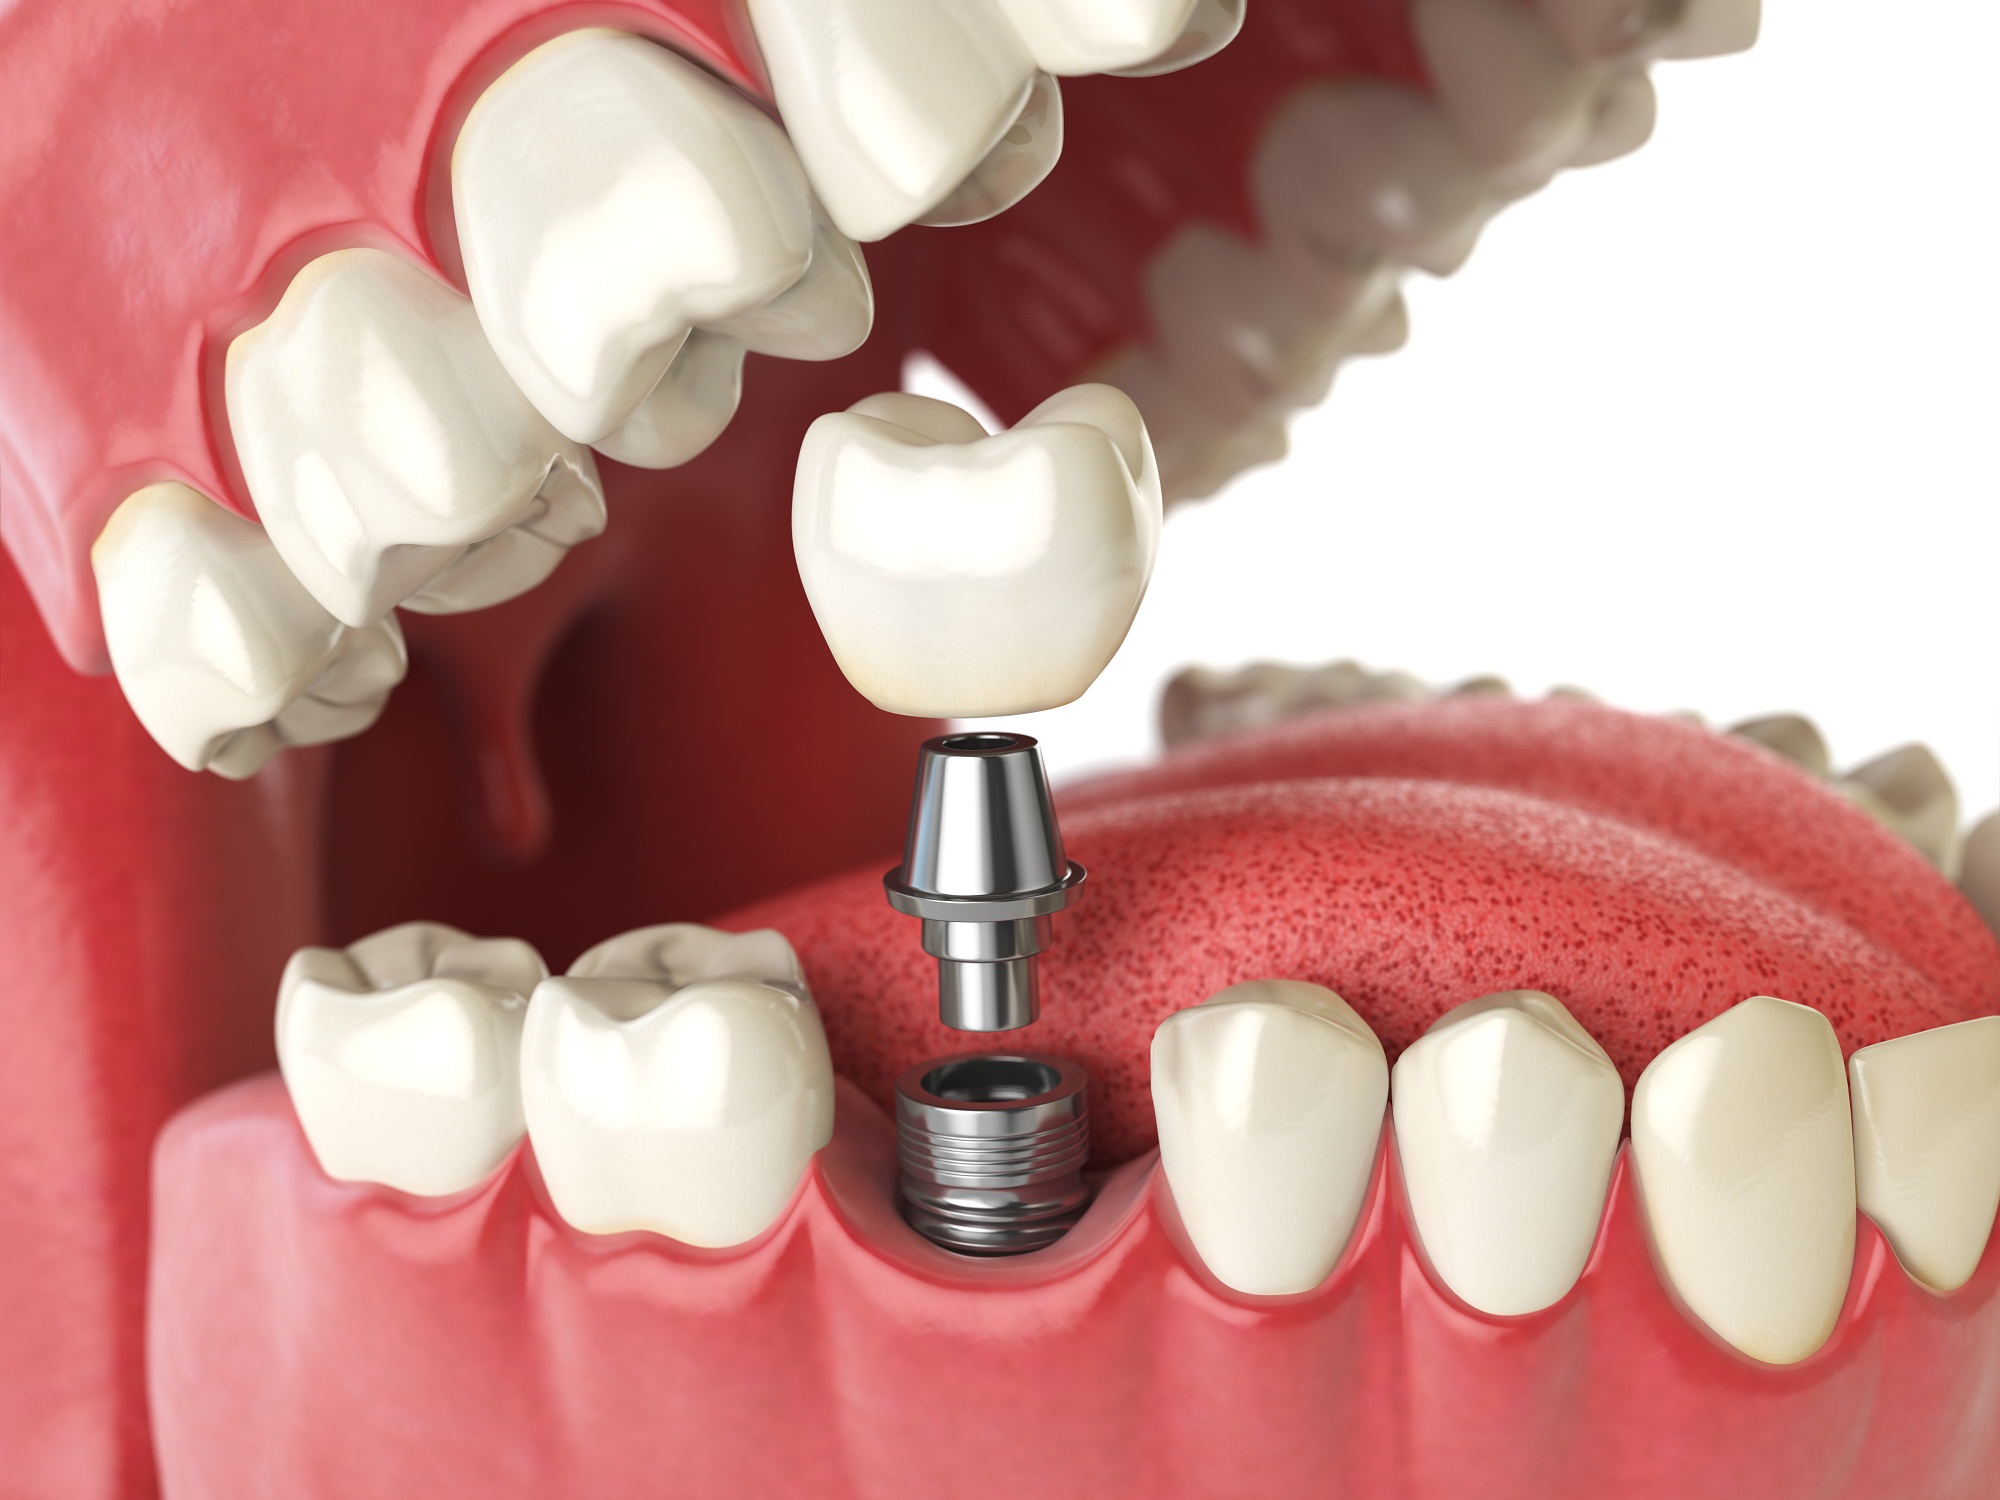 Dental Implants Manchester – Does The Procedure Hurt